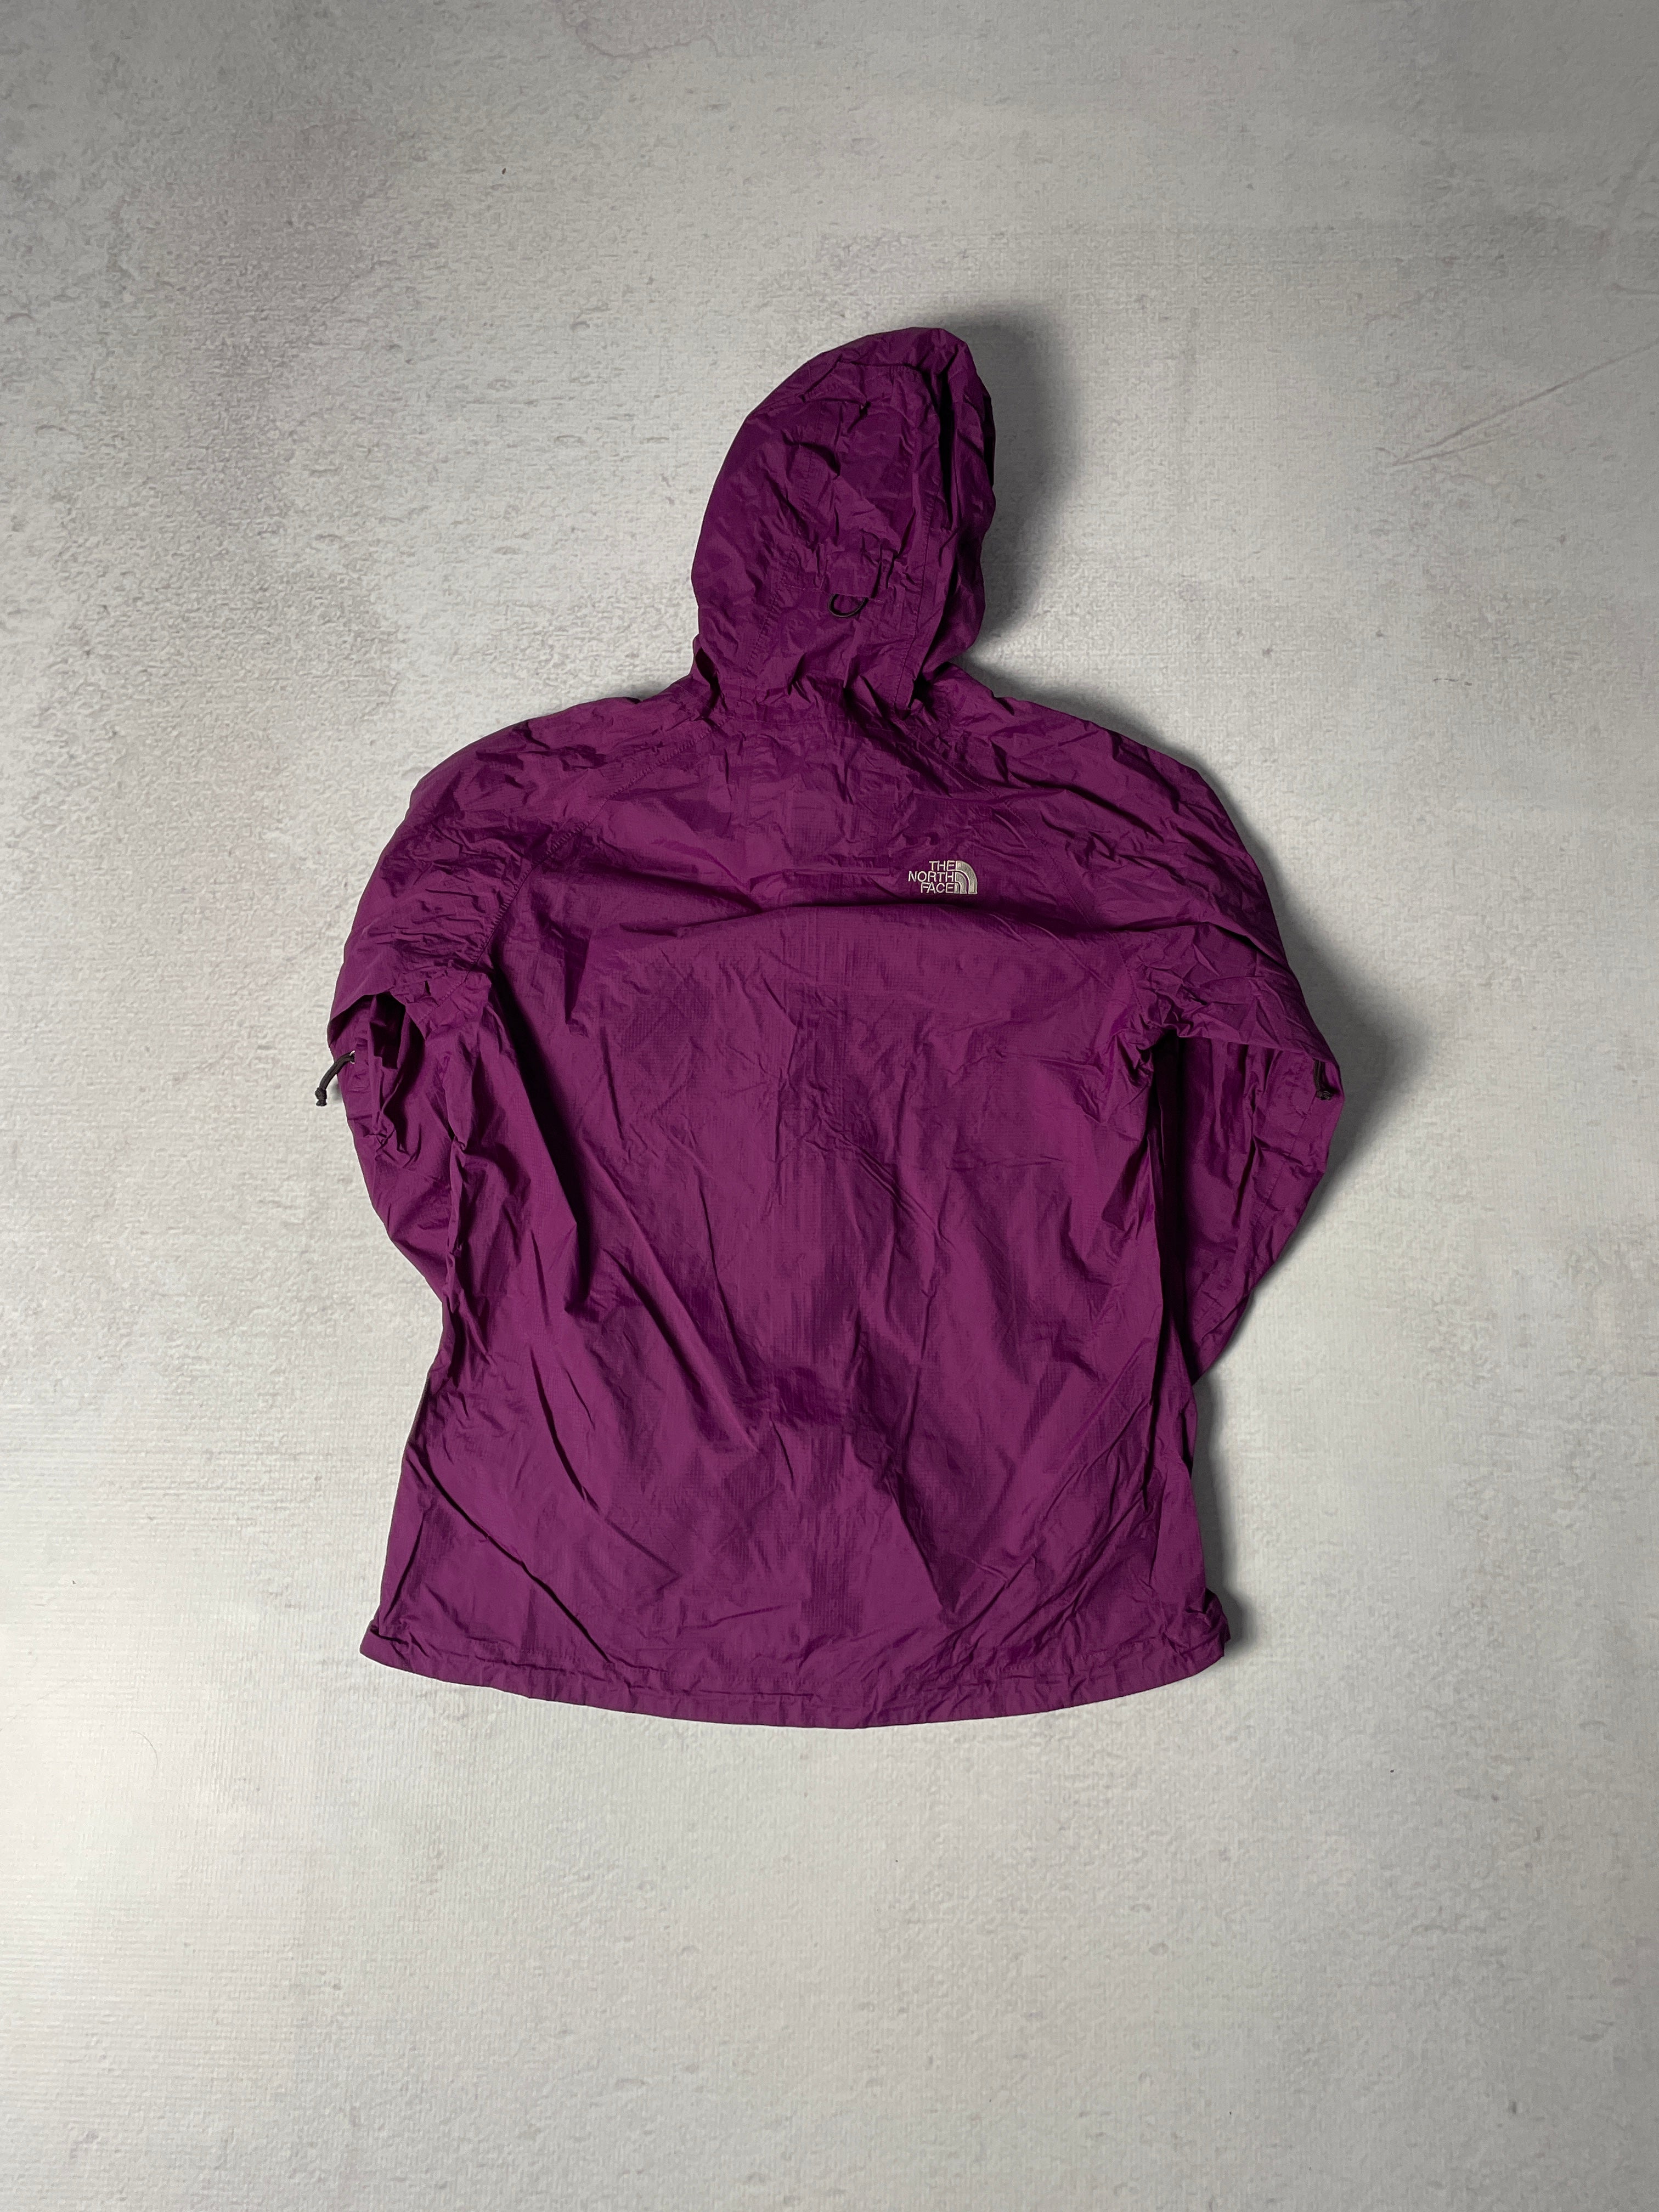 Vintage The North Face HyVent Windbreaker - Women's Small